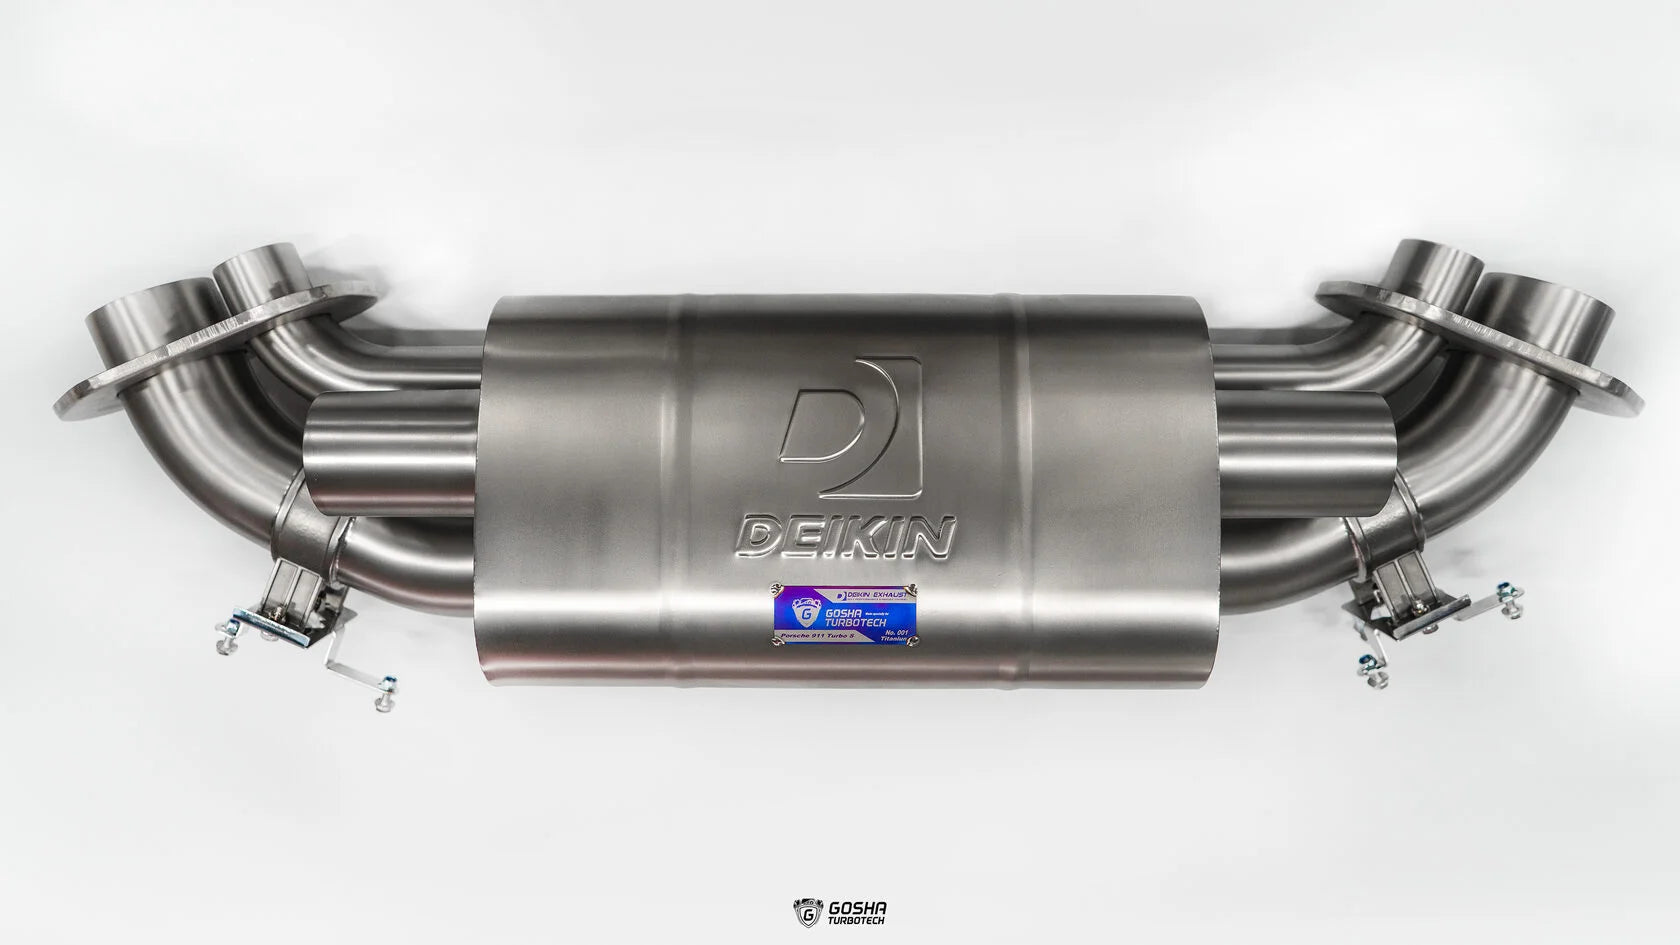 DEIKIN 10-PO.911.T/TS.992.S-ES-DP-Ti-00 Exhaust system "Street" Titan for 911 Turbo/Turbo S (992) complete with downpipes without HeatShield Photo-0 